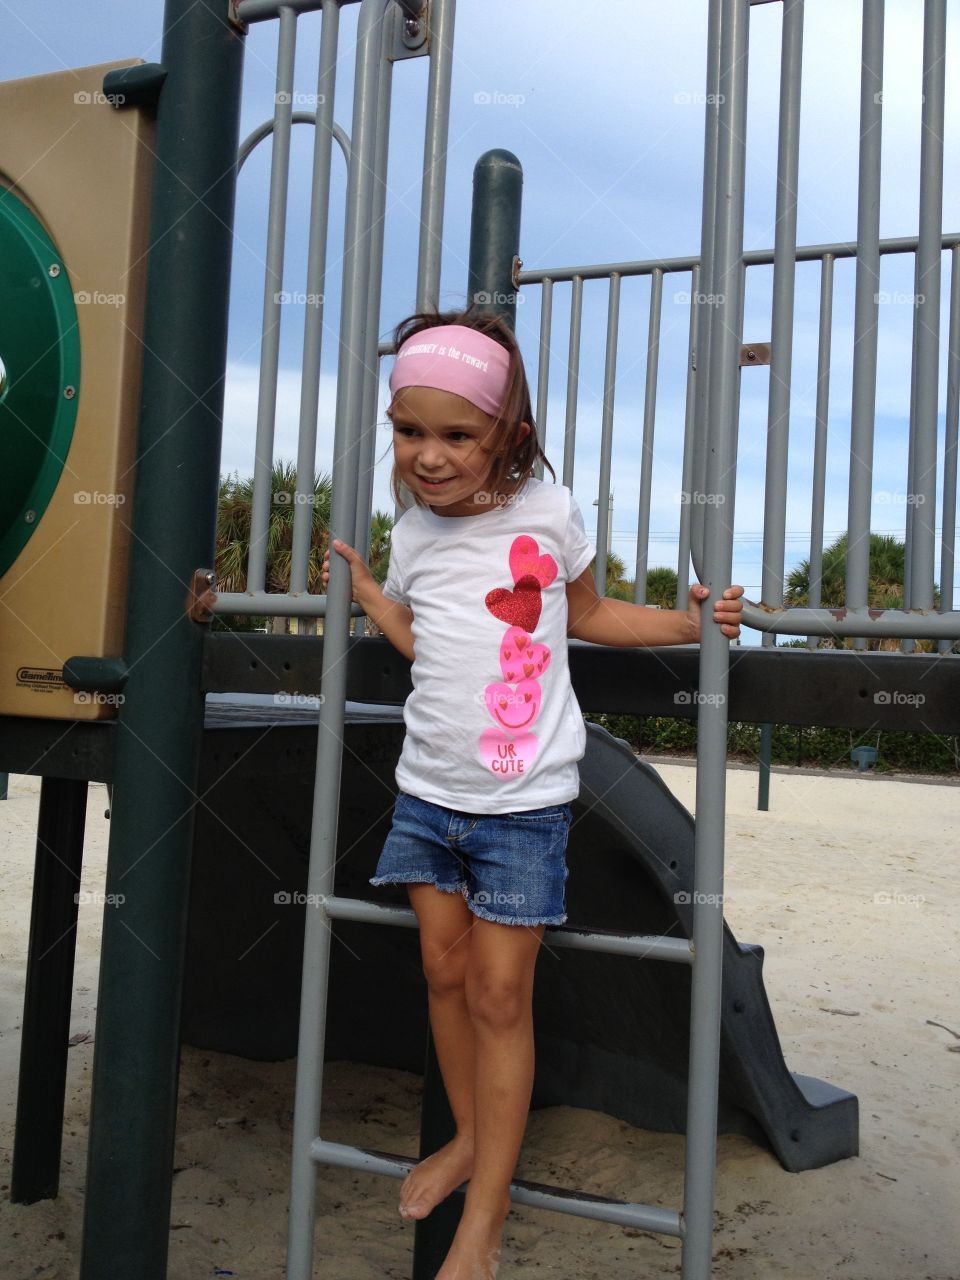 Jungle gym fun . Little girl standing on metal bars of a jungle gym